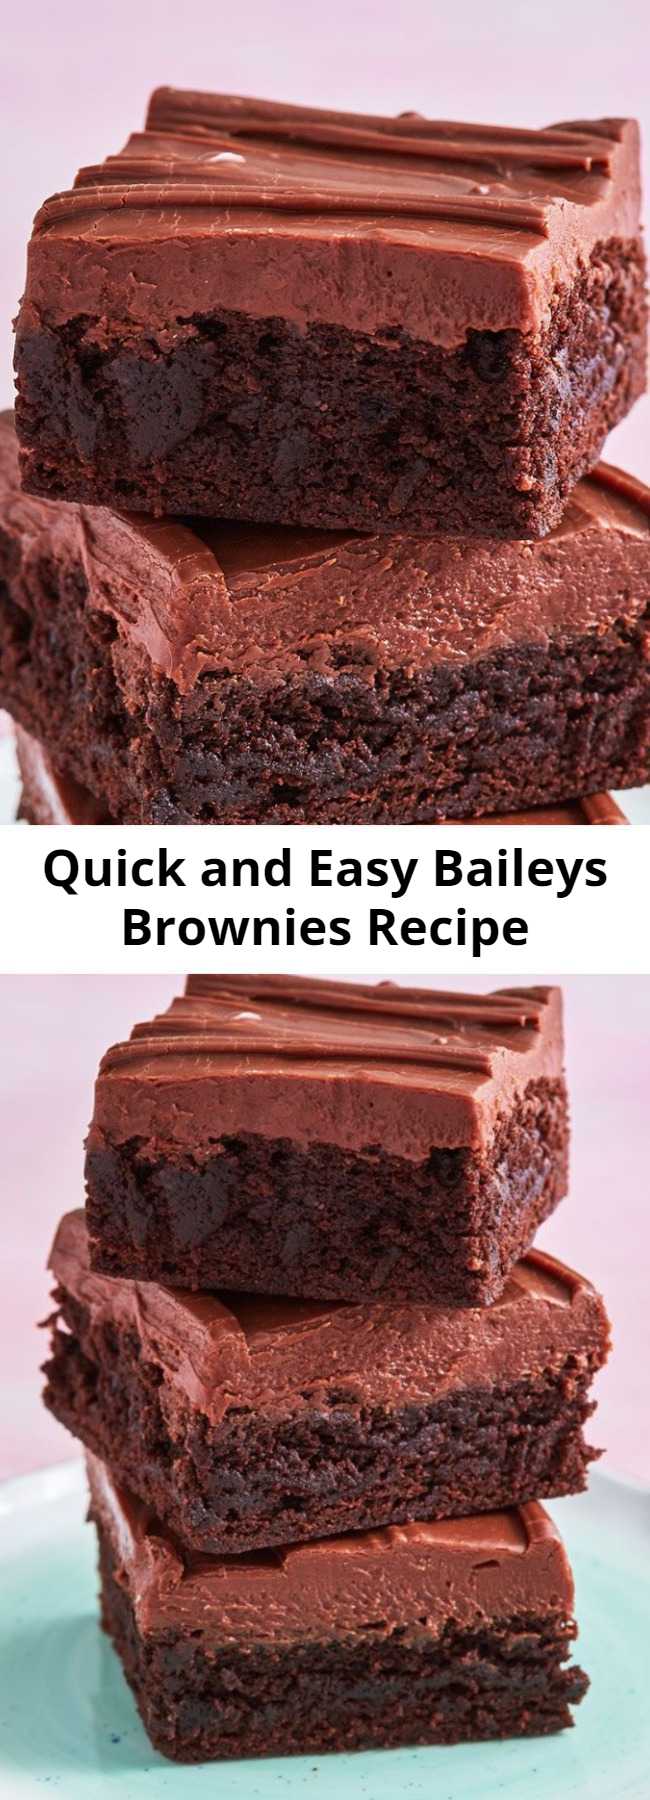 Quick and Easy Baileys Brownies Recipe - These brownies are something special. Give boxed brownie mix a major upgrade with this easy recipe for the best Bailey's brownies.